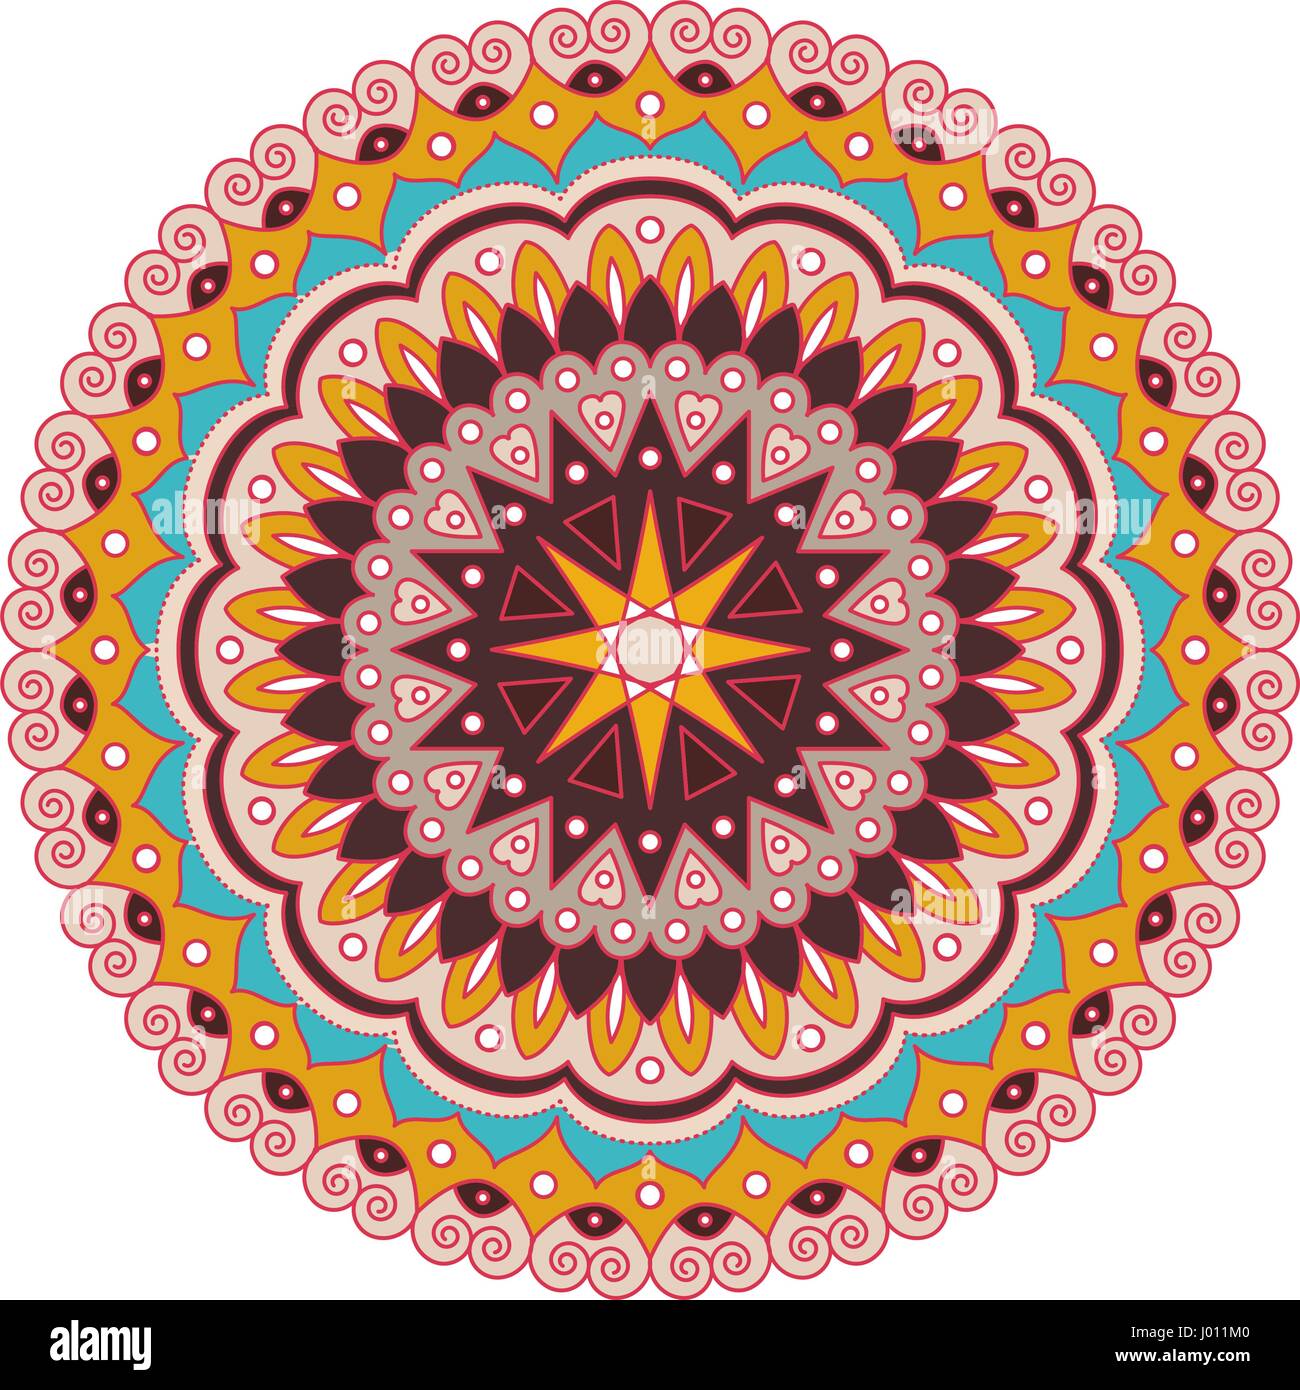 Decorative arabic round lace ornate mandala. Vintage vector pattern for print or web design. abstract colorful background. Stock Vector